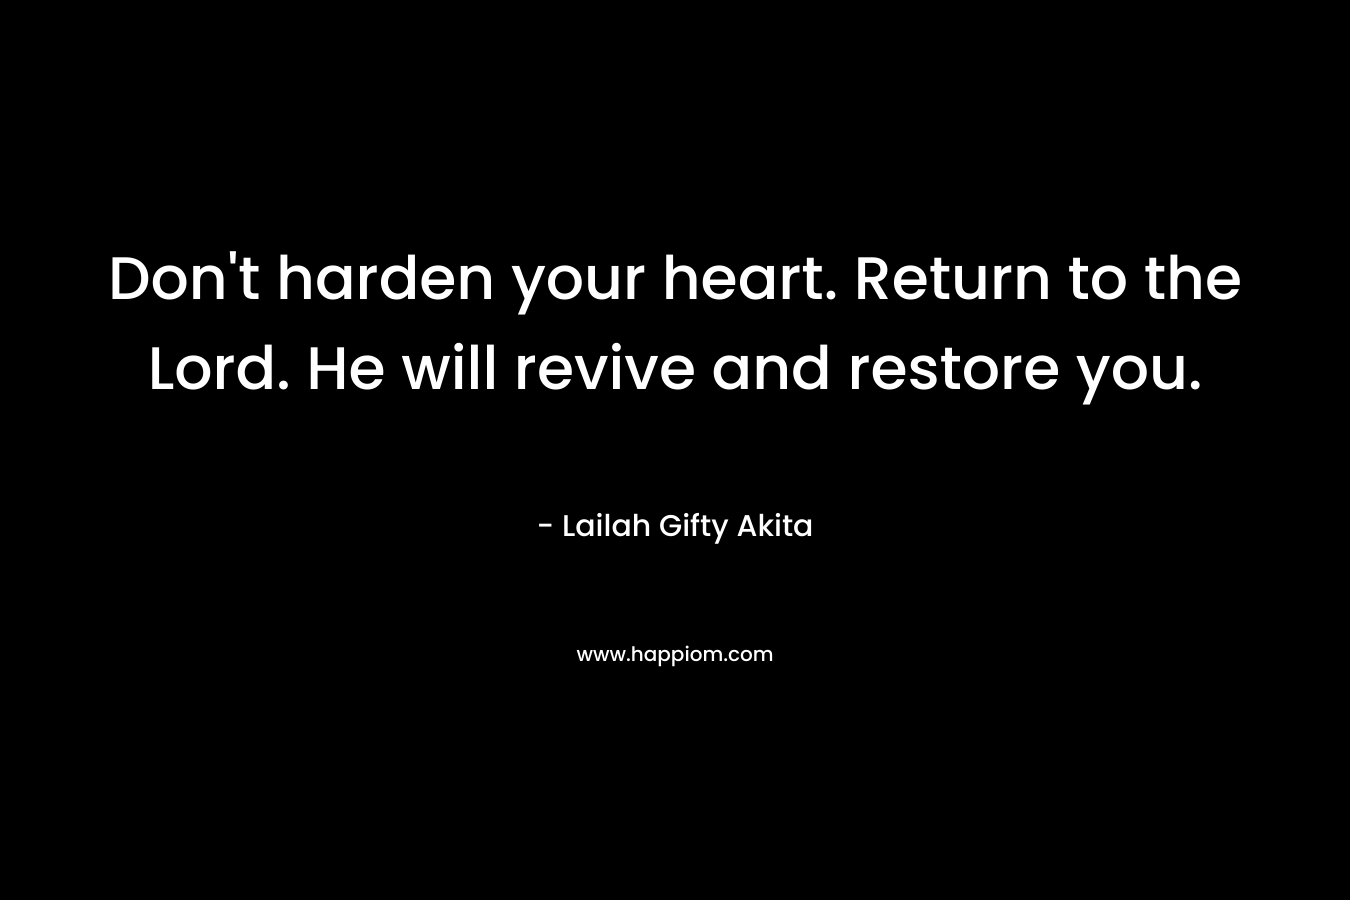 Don’t harden your heart. Return to the Lord. He will revive and restore you. – Lailah Gifty Akita